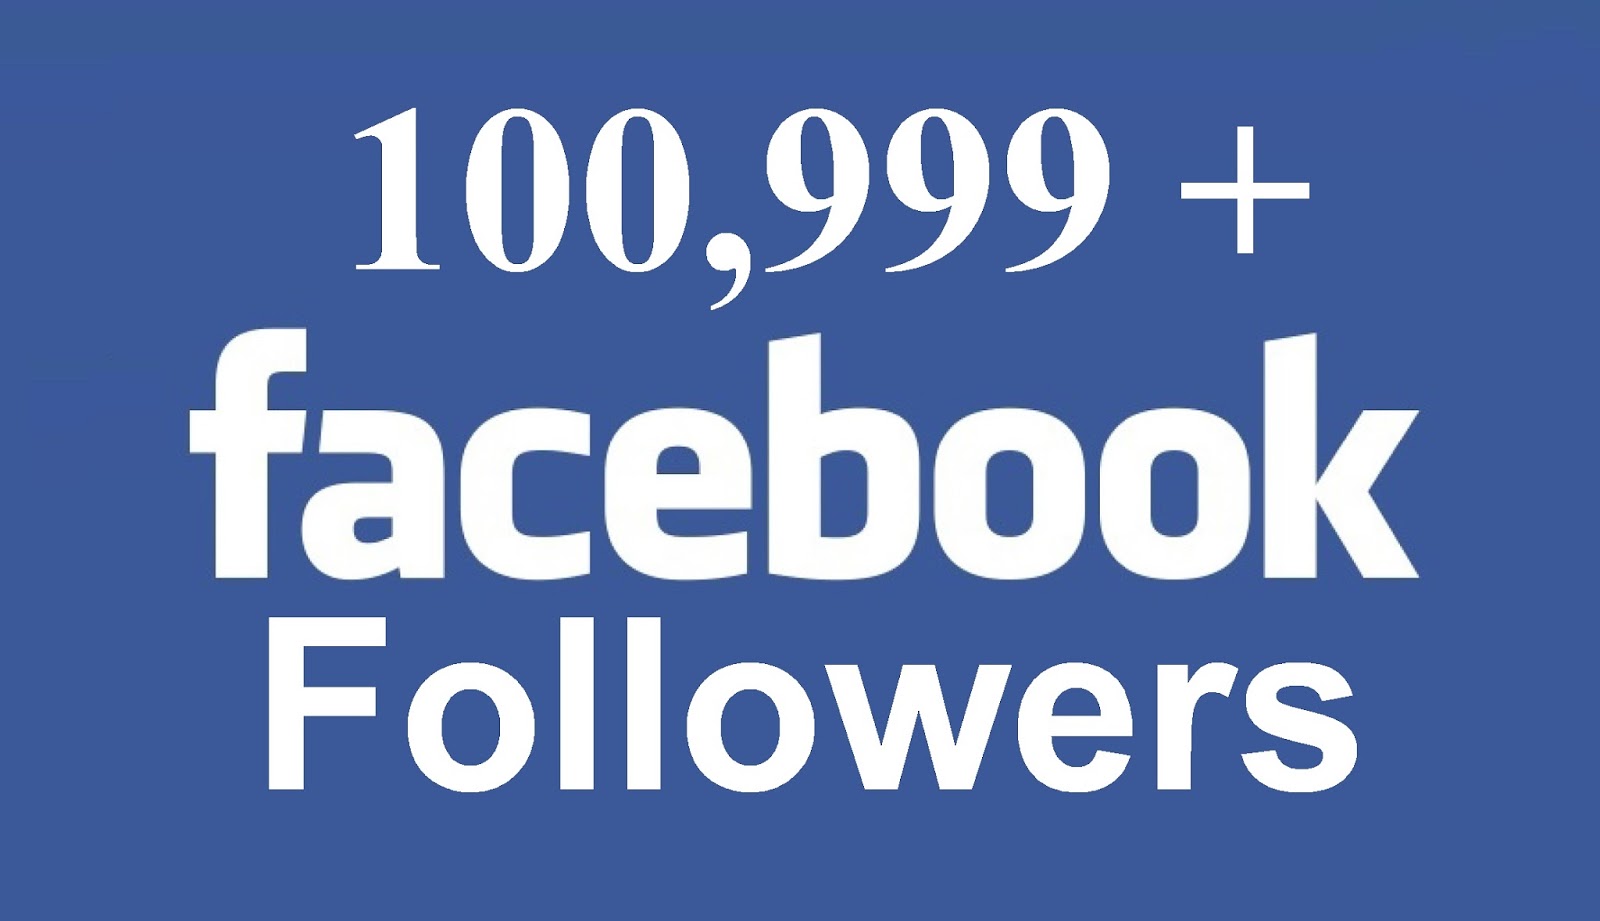 A Facebook page with over 100,000 followers that posts original content and complies with community guidelines.